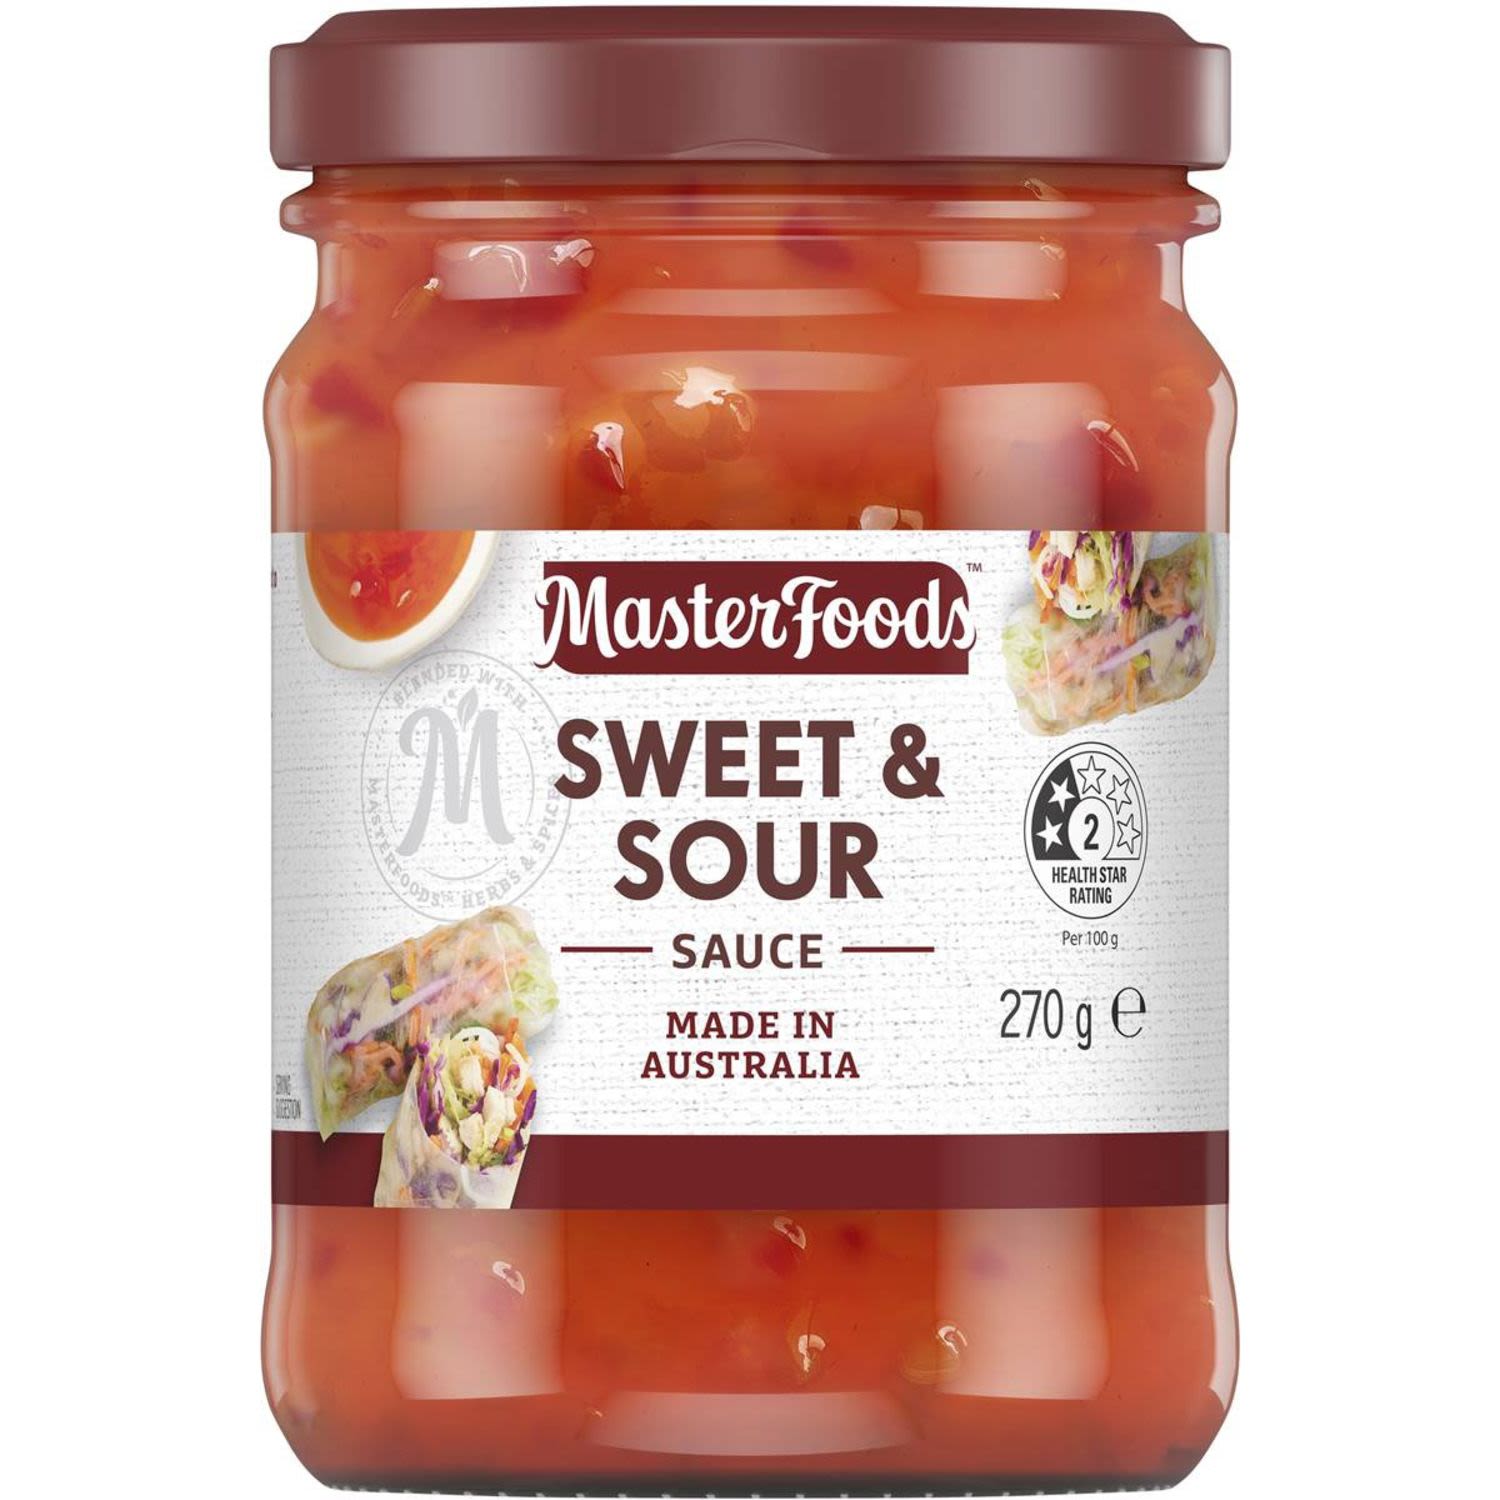 Masterfoods Sweet & Sour Sauce 270gm